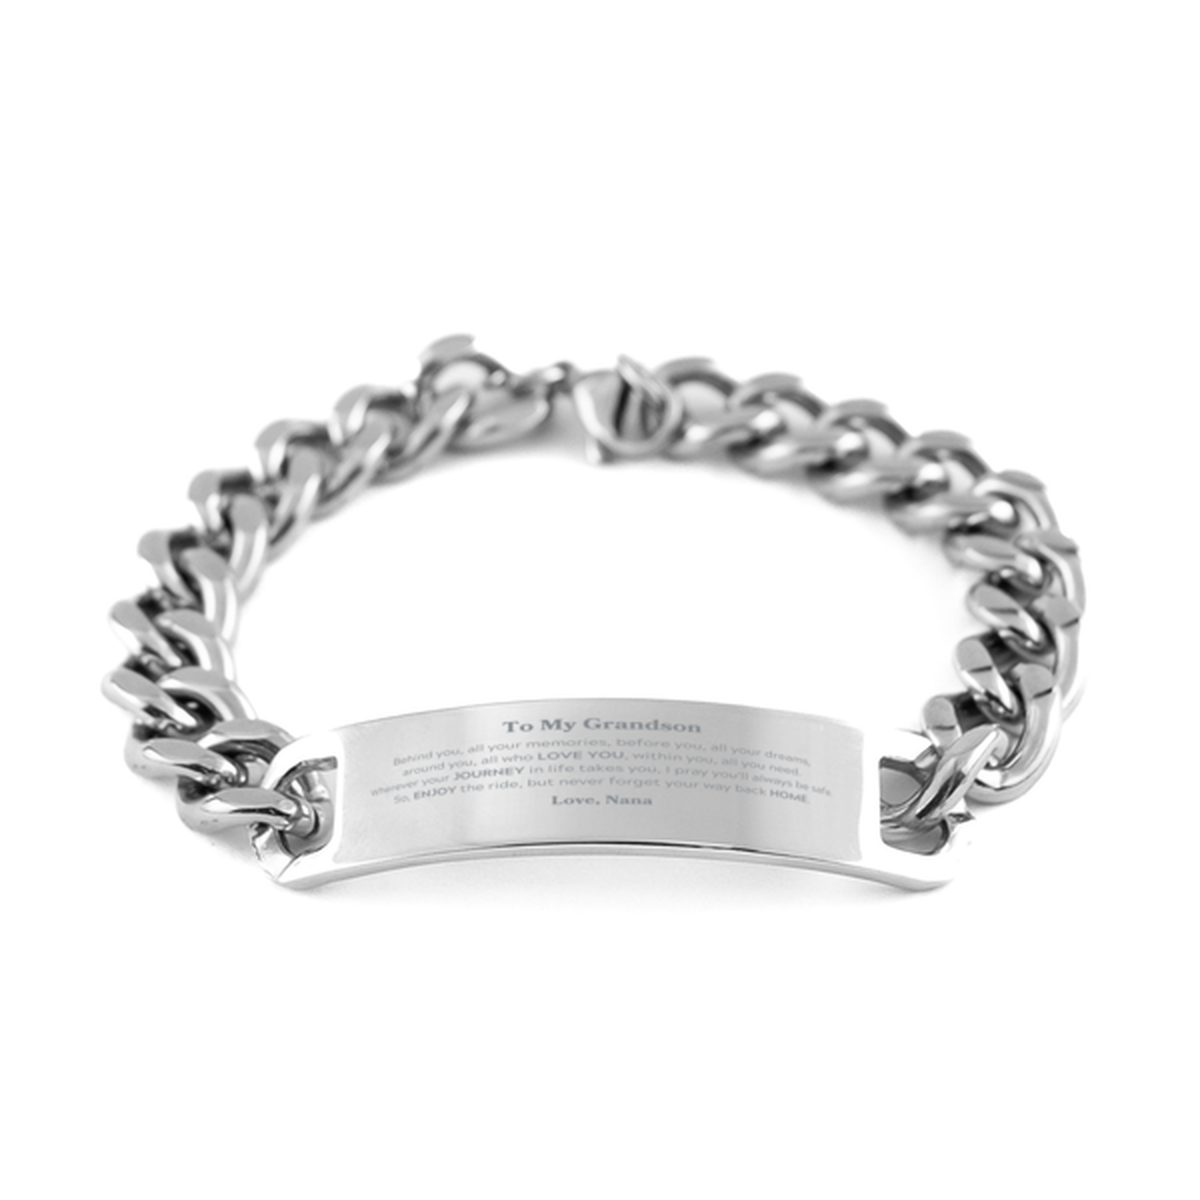 To My Grandson Graduation Gifts from Nana, Grandson Cuban Chain Stainless Steel Bracelet Christmas Birthday Gifts for Grandson Behind you, all your memories, before you, all your dreams. Love, Nana